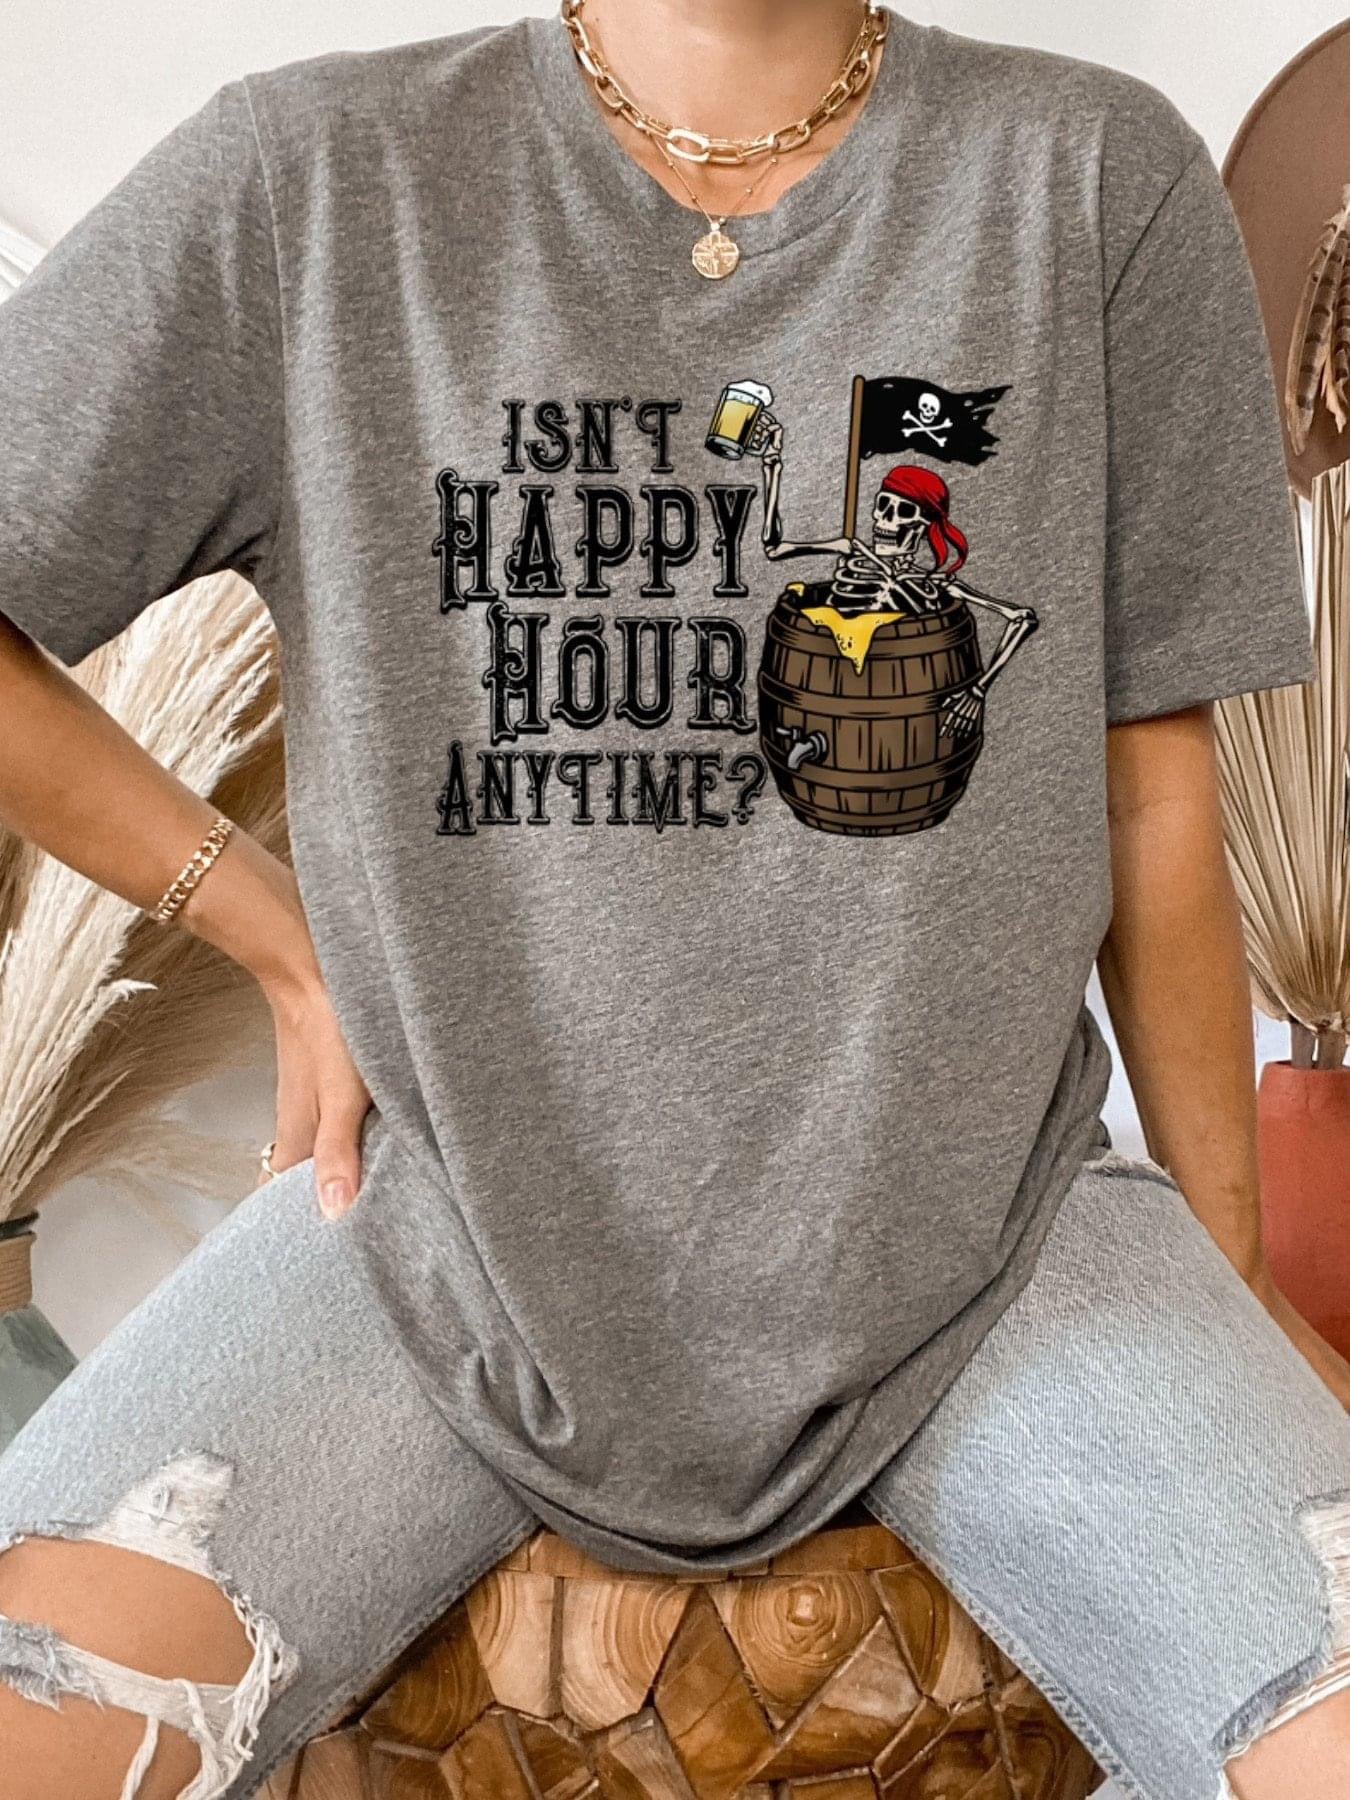 ISN’T HAPPY HOUR ANYTIME?